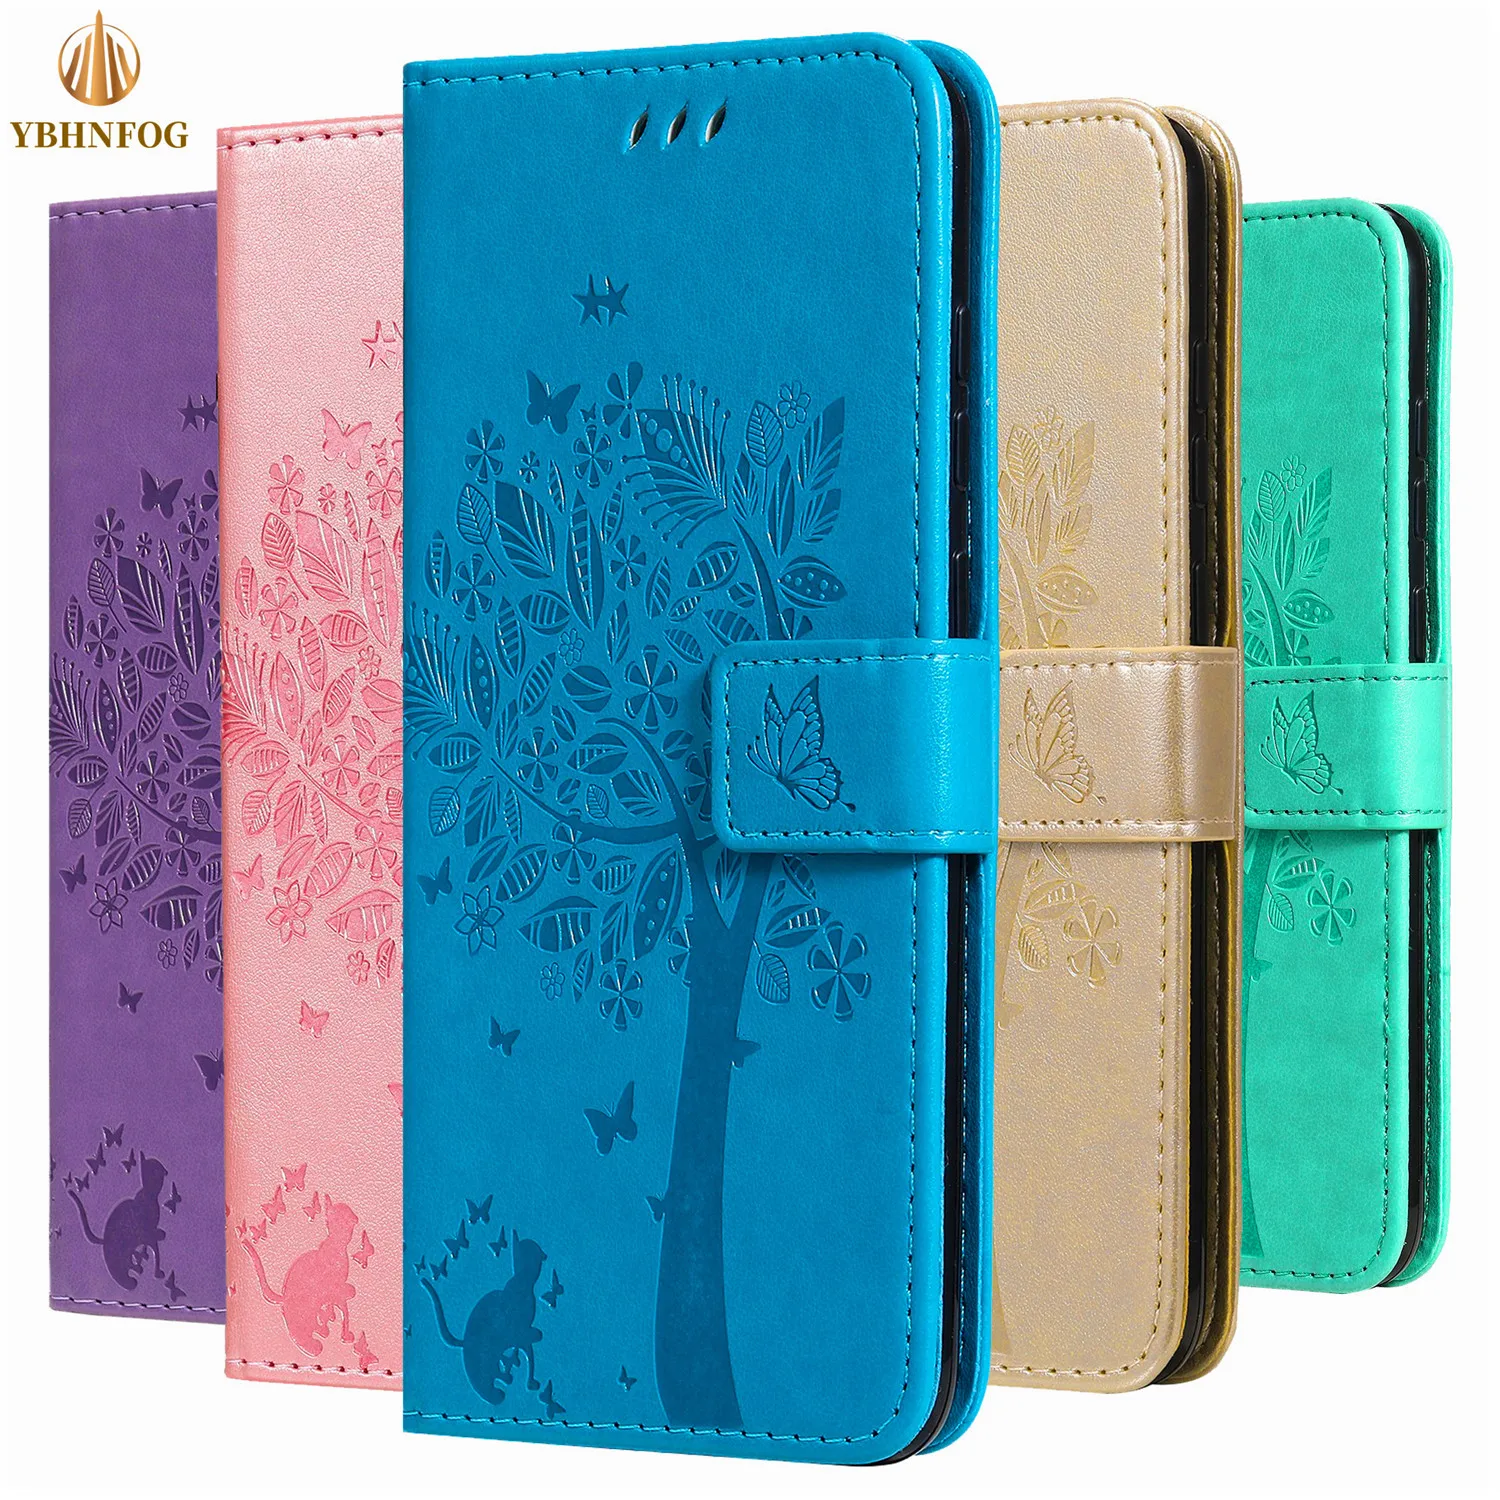 Leather Flip Case For LG K4 K7 K8 2017 K10 2018 G4 G5 Q6 G7 G8X G8S ThinQ G9 Xpower 2 3 Nexus 5X Wallet Stand Cover Phone Coque